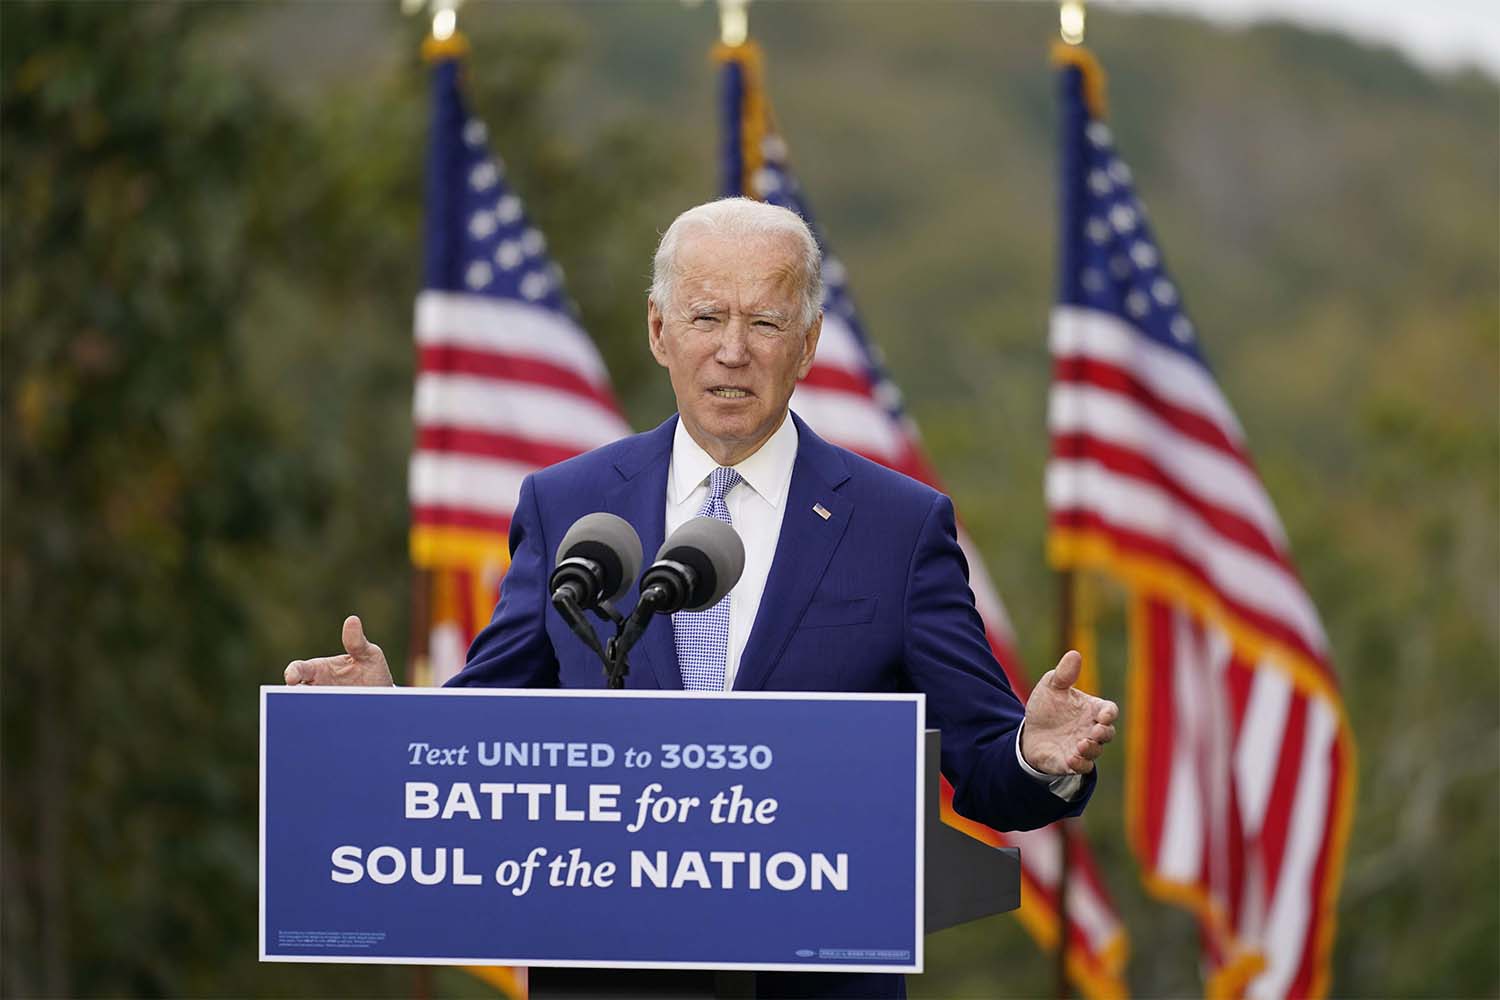 Biden also faces pressure both from Democrats and Republican opponents of the Iran deal